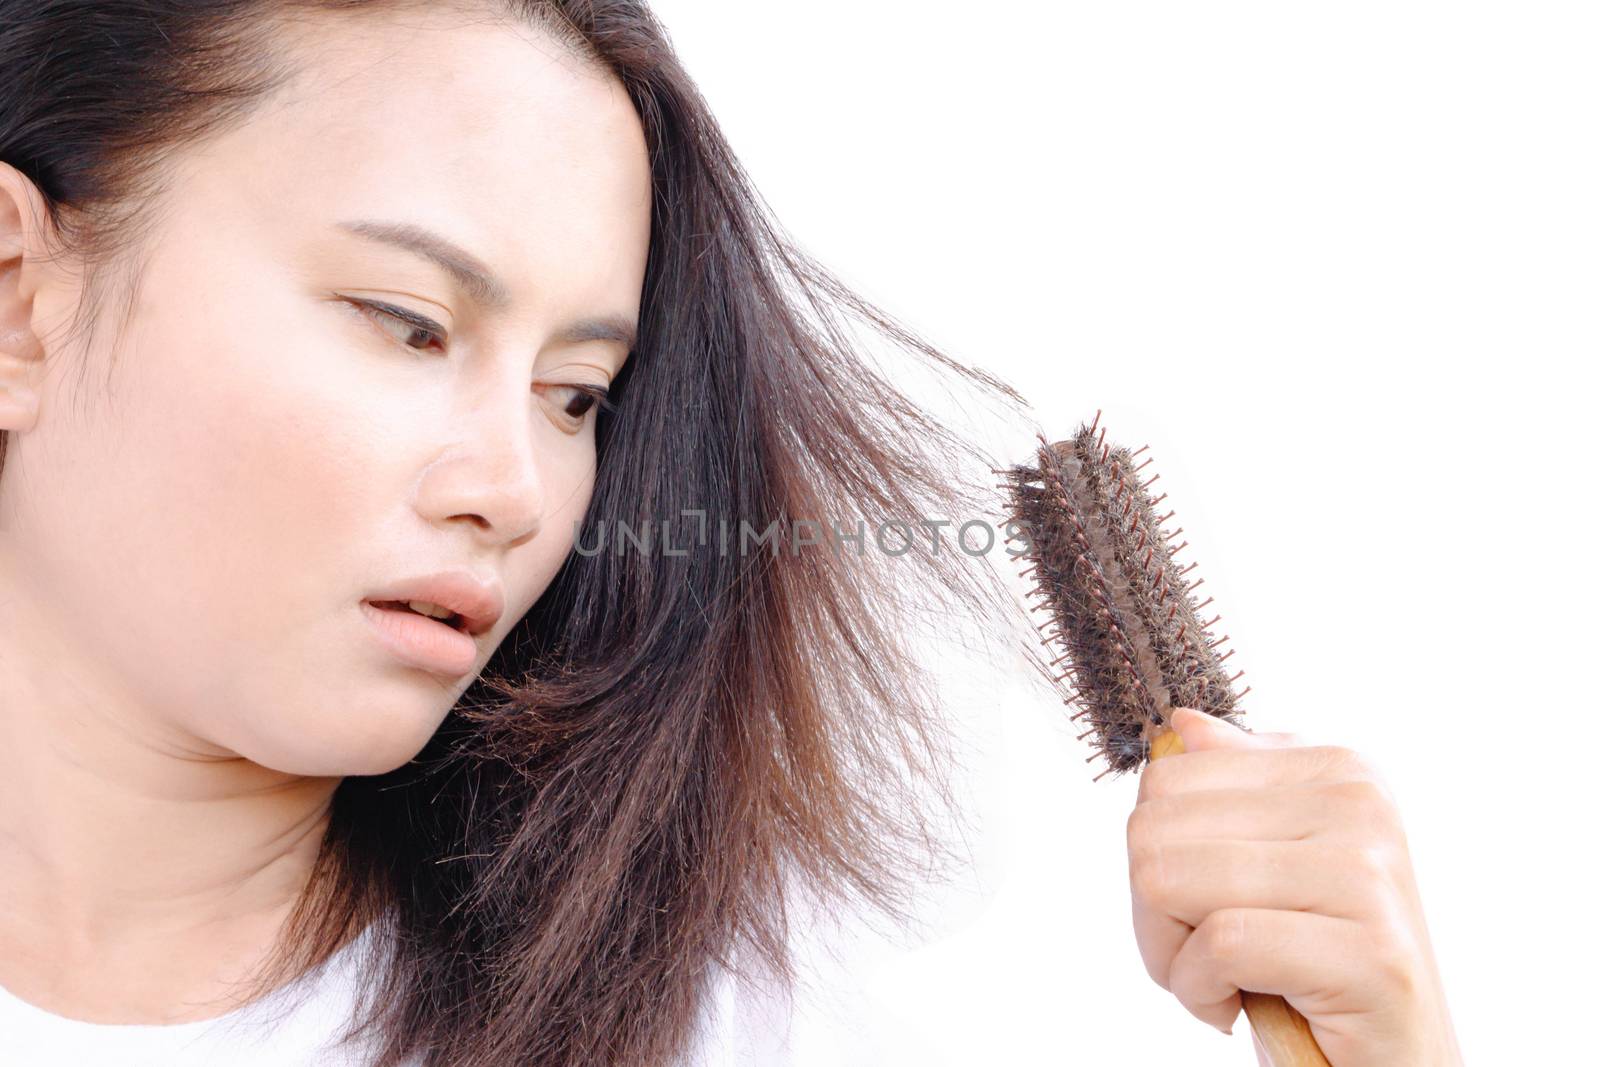 Woman serious hair loss problem for health care shampoo and beauty product concept, selective focus